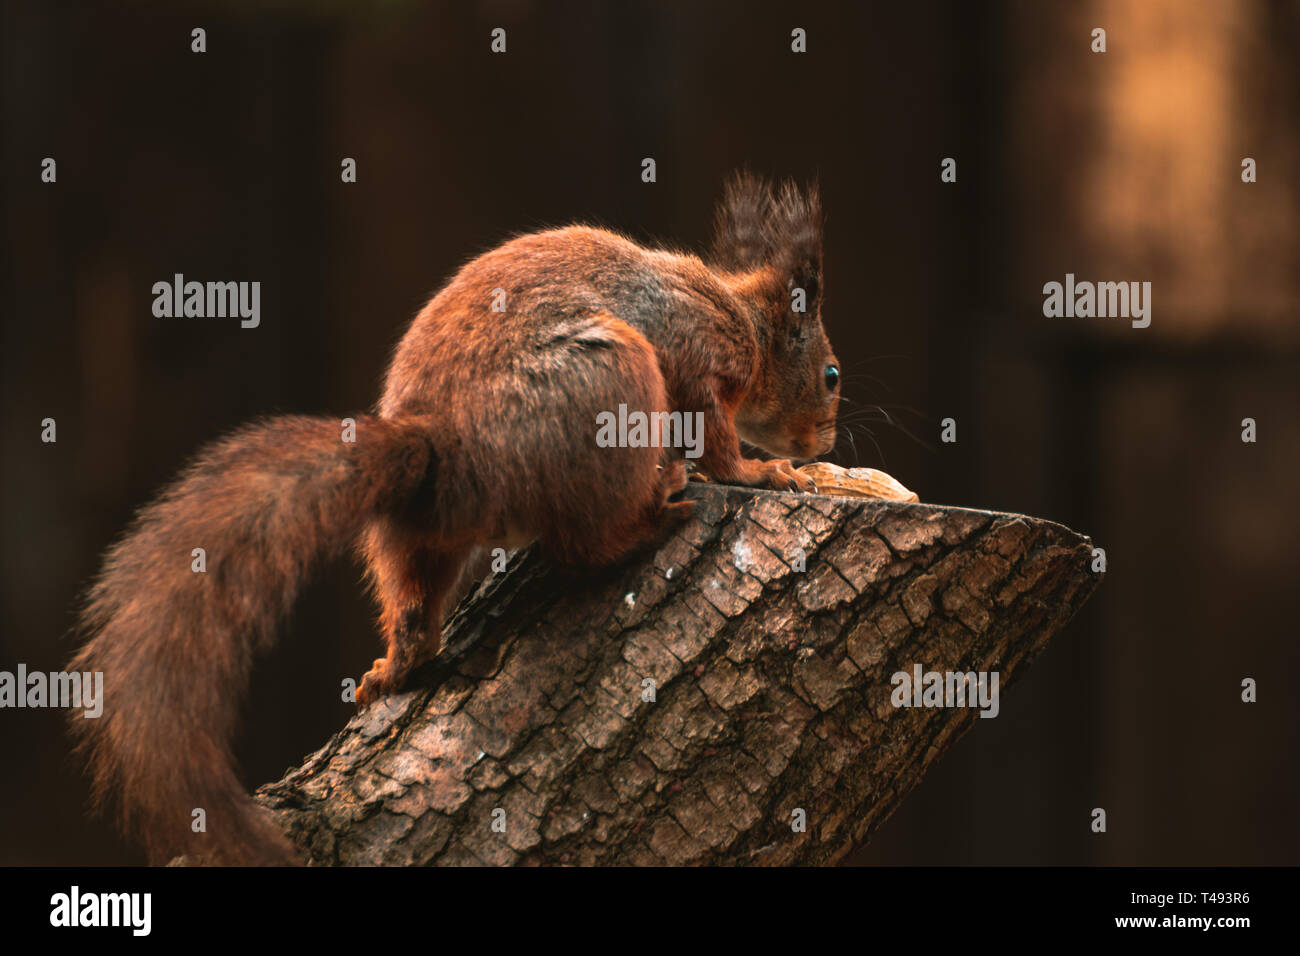 Eurasian red squirrel on a tree stump eating nuts Stock Photo